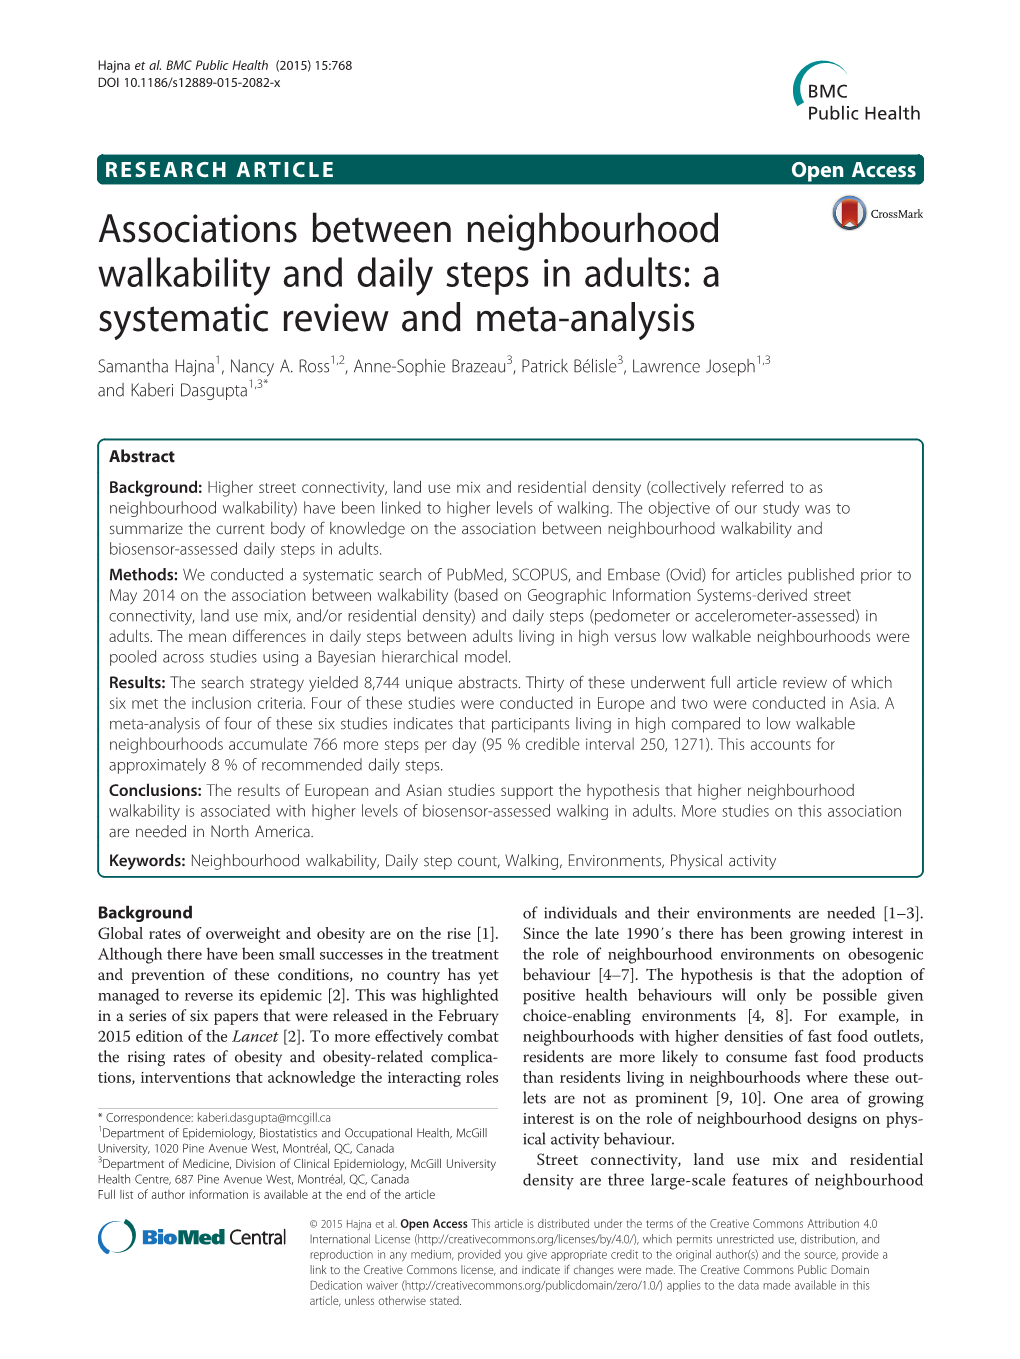 Associations Between Neighbourhood Walkability and Daily Steps in Adults: a Systematic Review and Meta-Analysis Samantha Hajna1, Nancy A